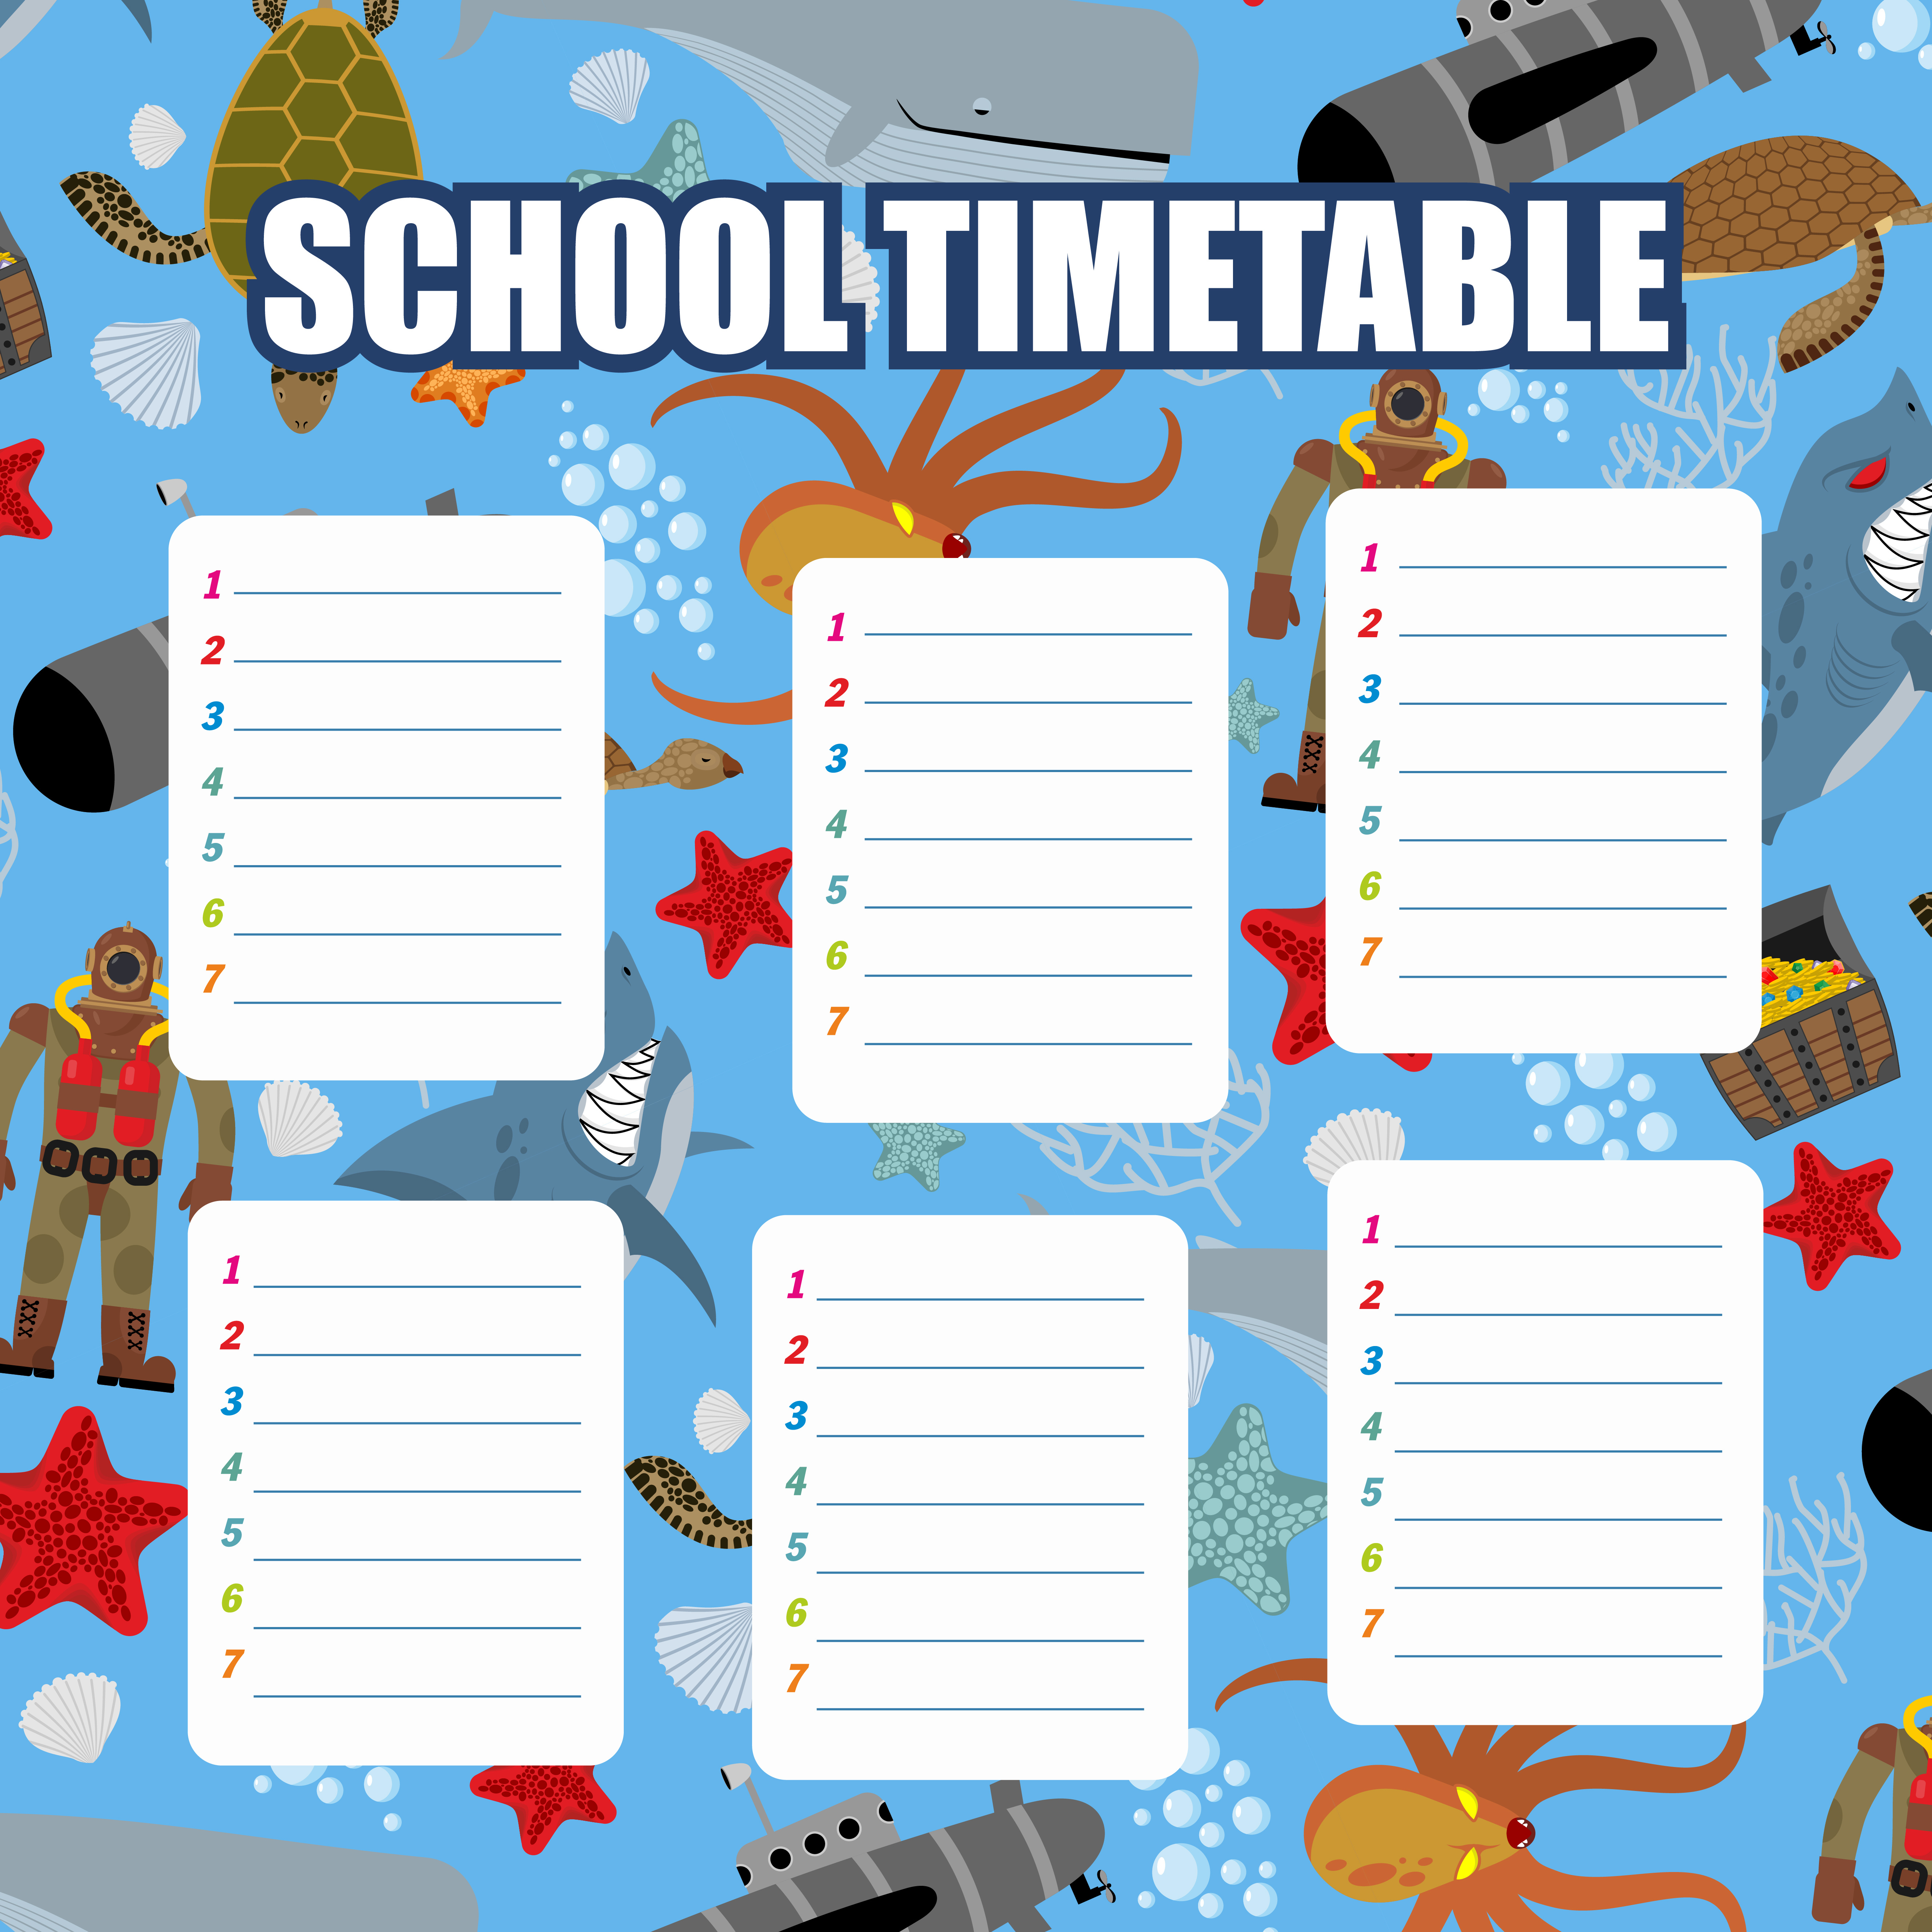 School timetable. Schedule. Back to school. Underwater World: Shark and Whale. Diver and turtle. Submarine and corals